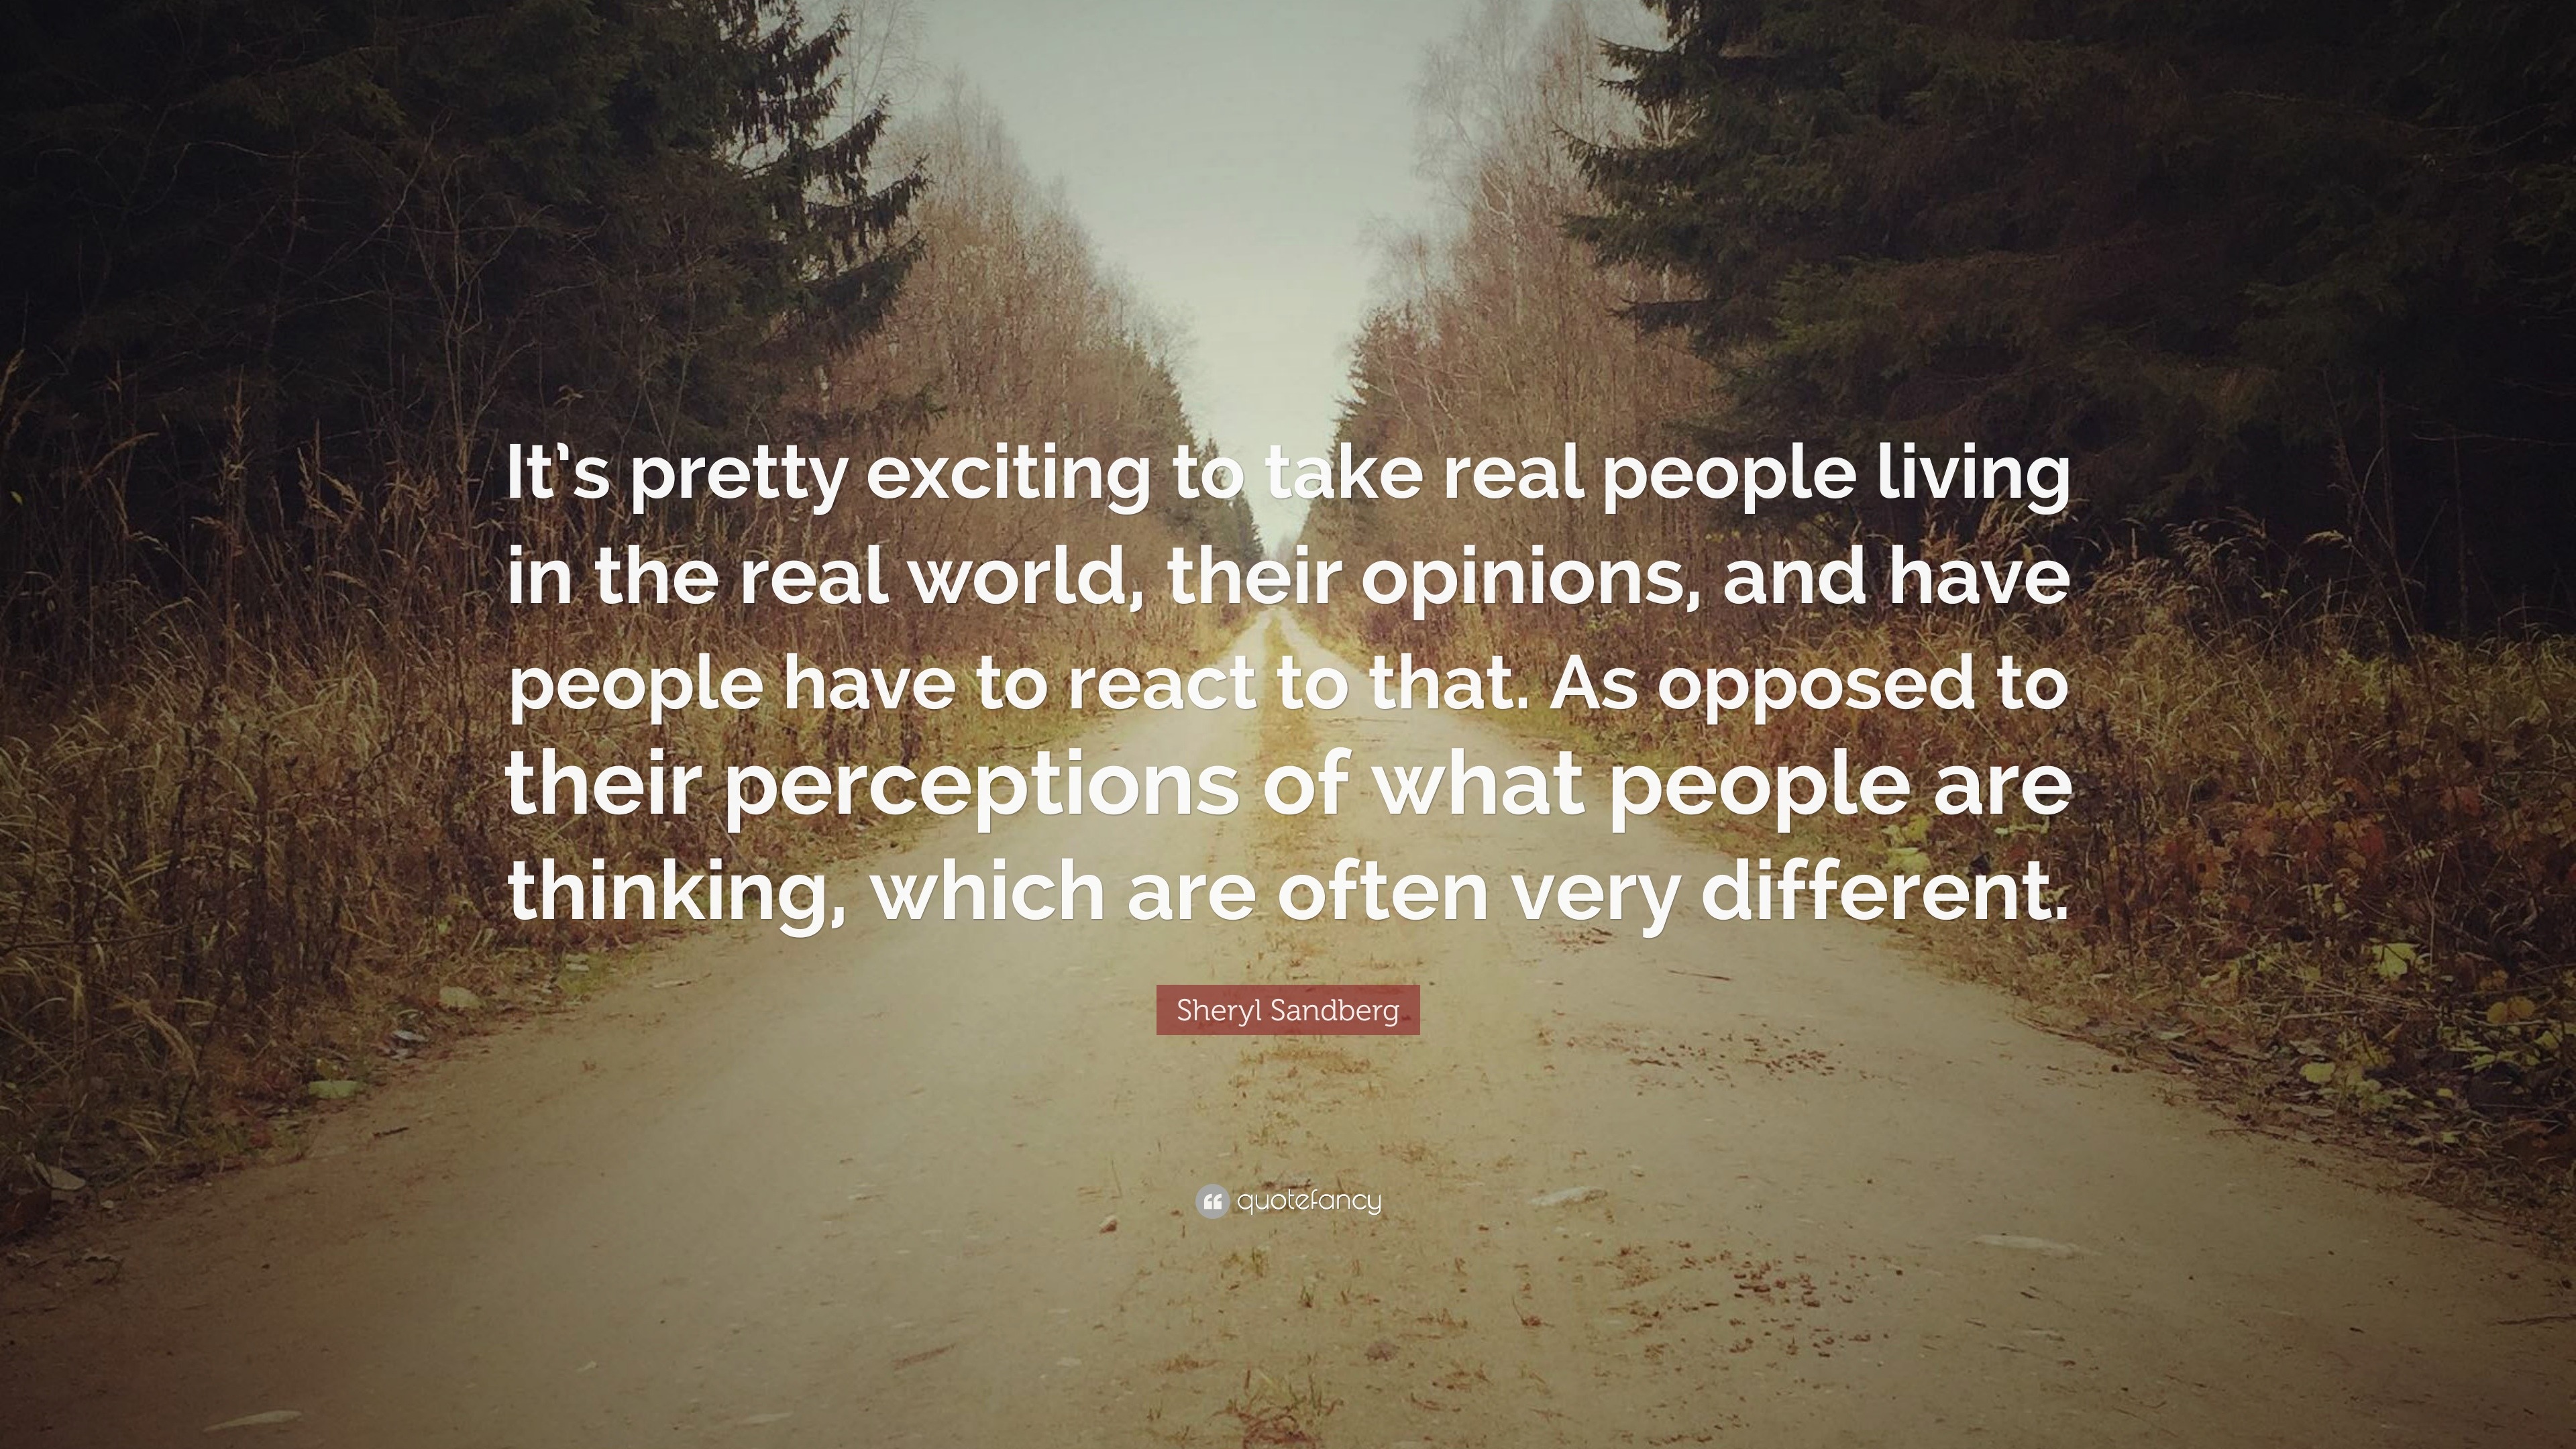 Sheryl Sandberg Quote: “It’s pretty exciting to take real people living ...